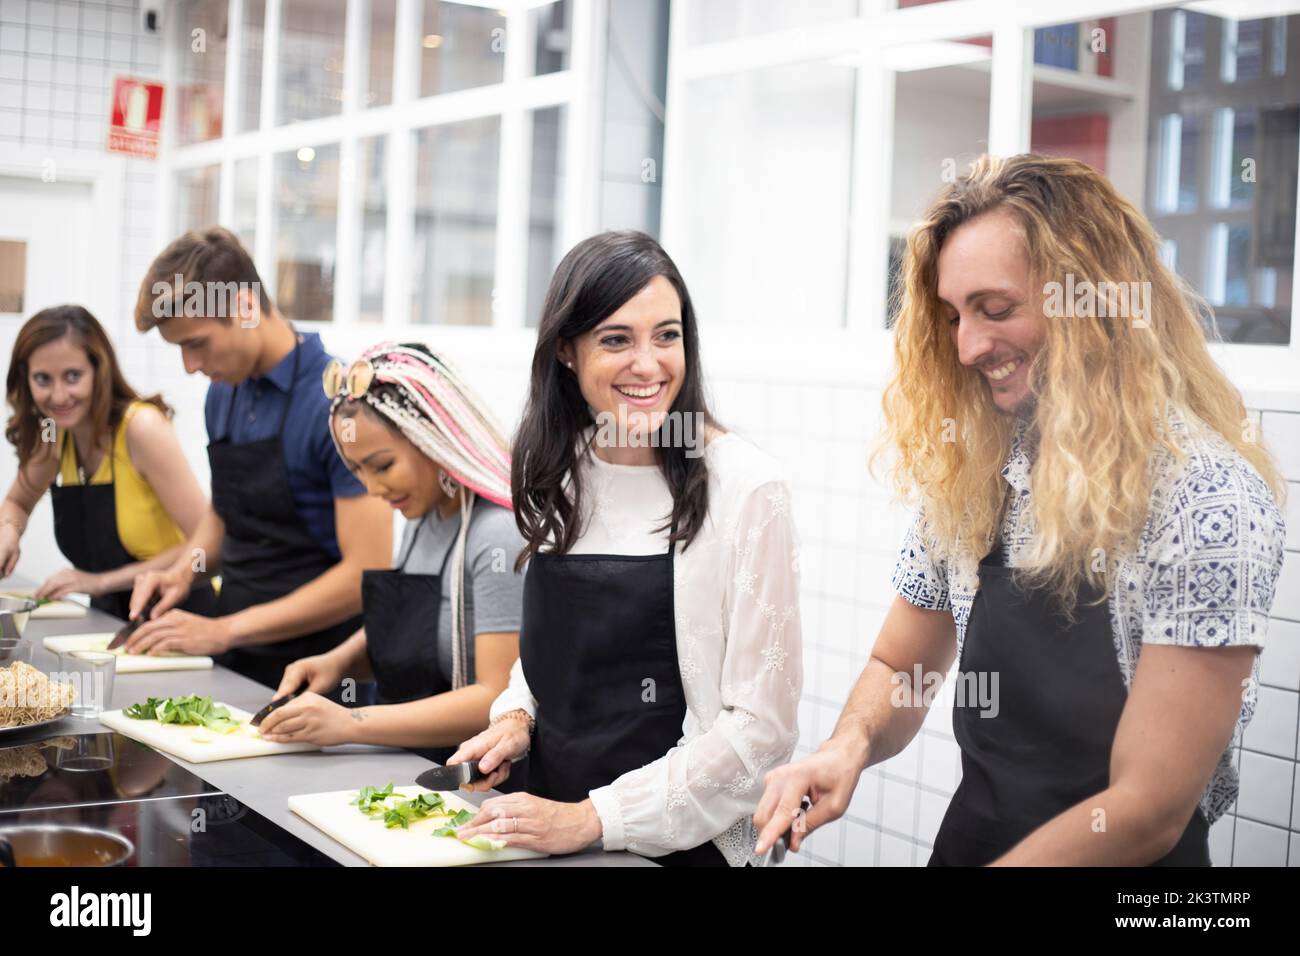 Side view of attentive multi ethnic people slicing vegetables with knife while standing together in kitchen with professional equipment Stock Photo